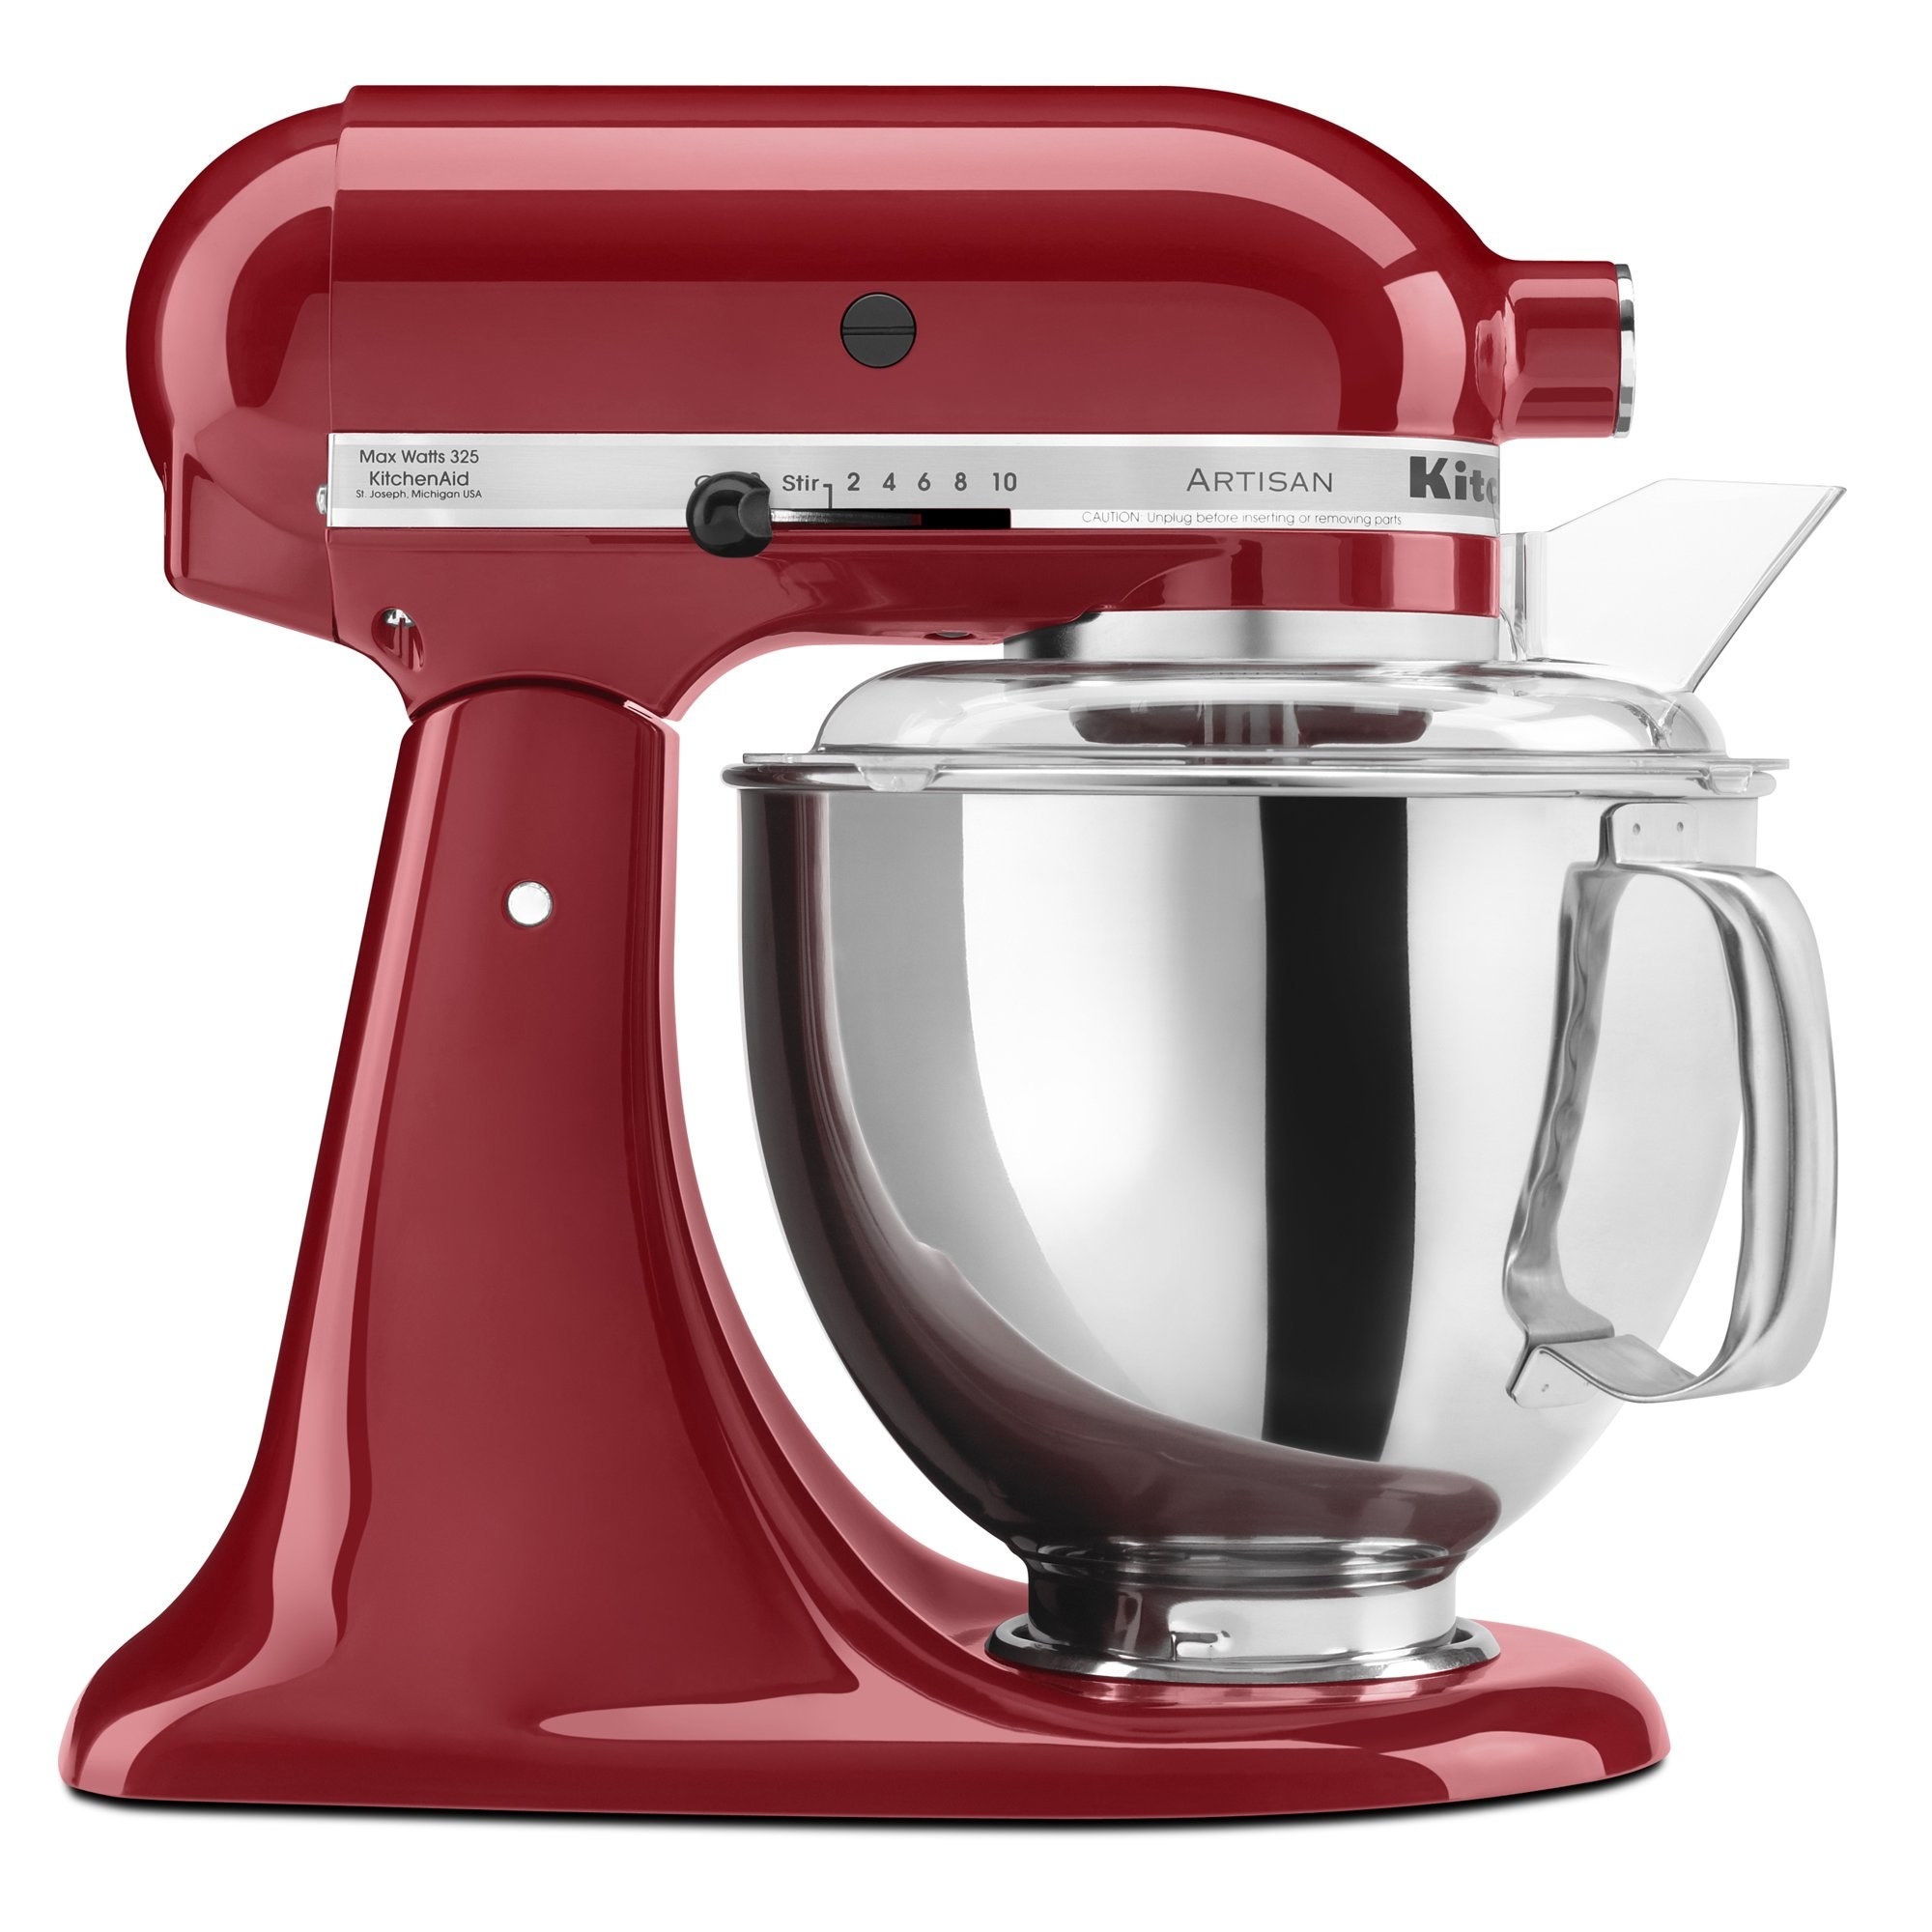 A red KitchenAid stand mixer with a stainless steel mixing bowl and a clear plastic pouring shield